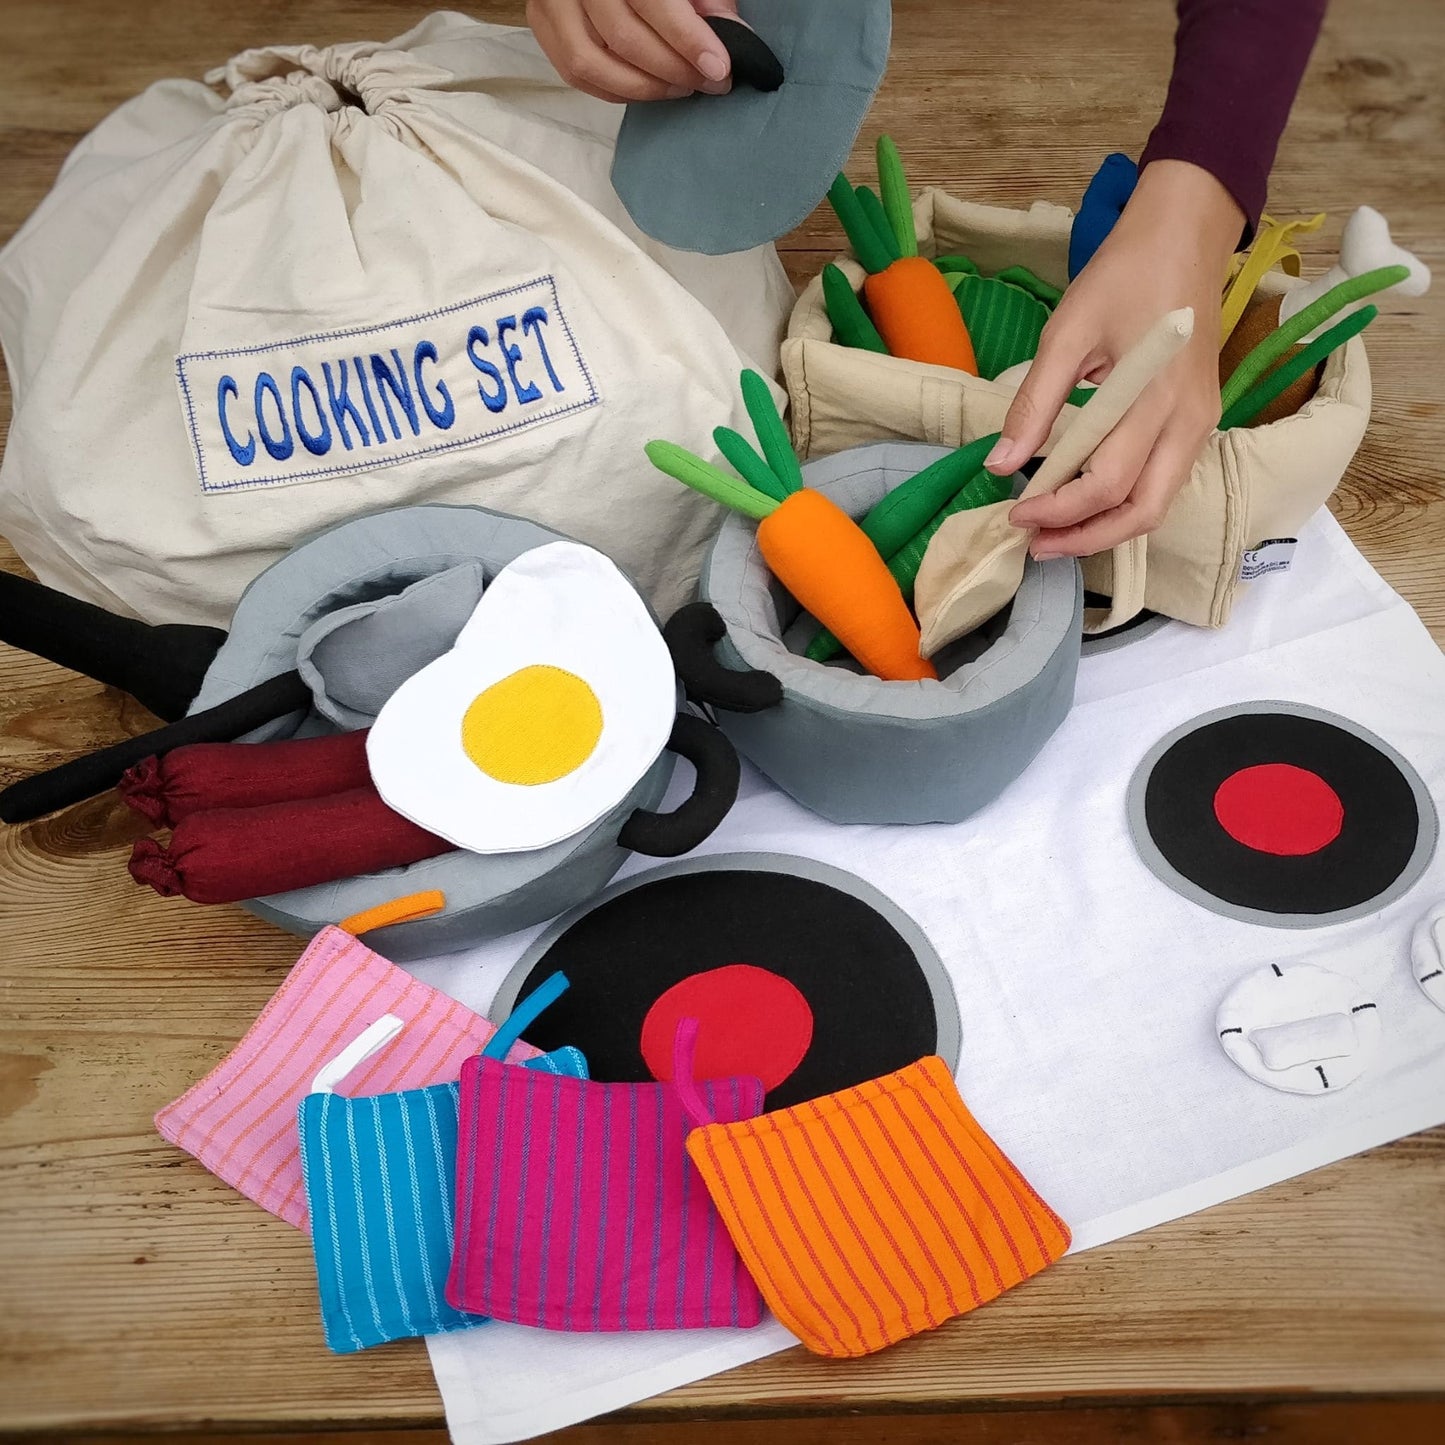 Toy Cooking Set - Fair Trade toy food set - from above